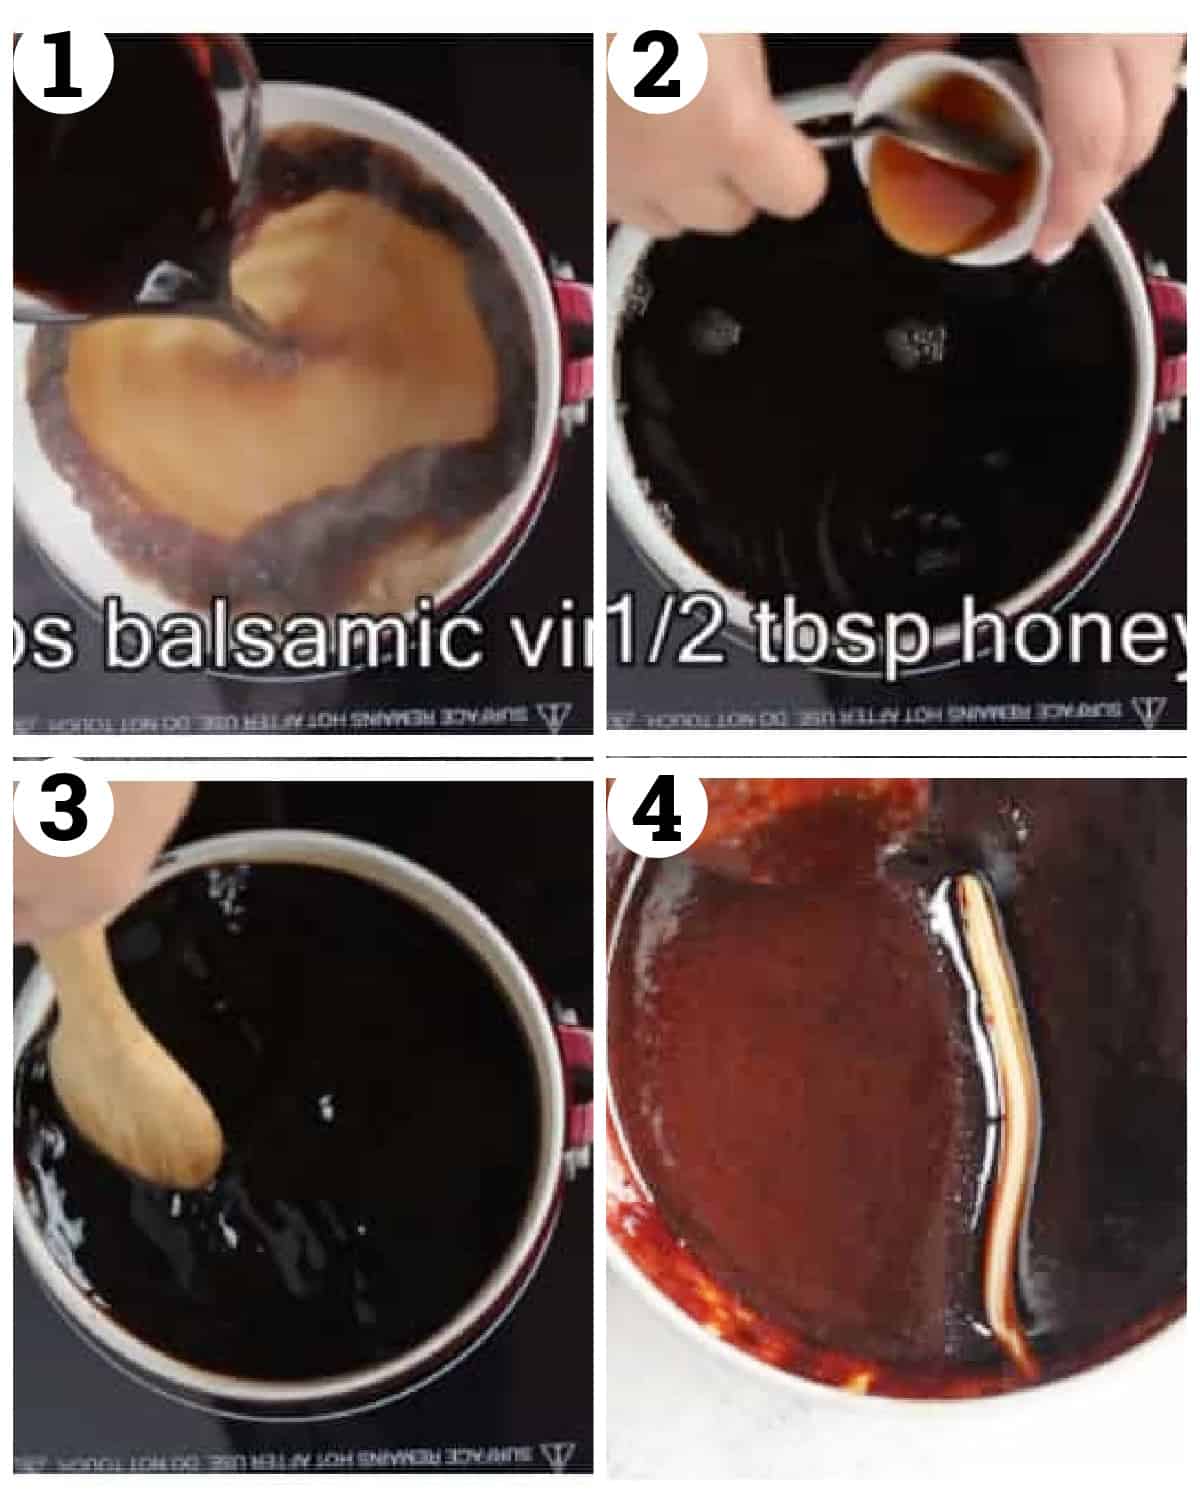 Add the balsamic vinegar to the pot with the honey and cook until thick and syrupy. 